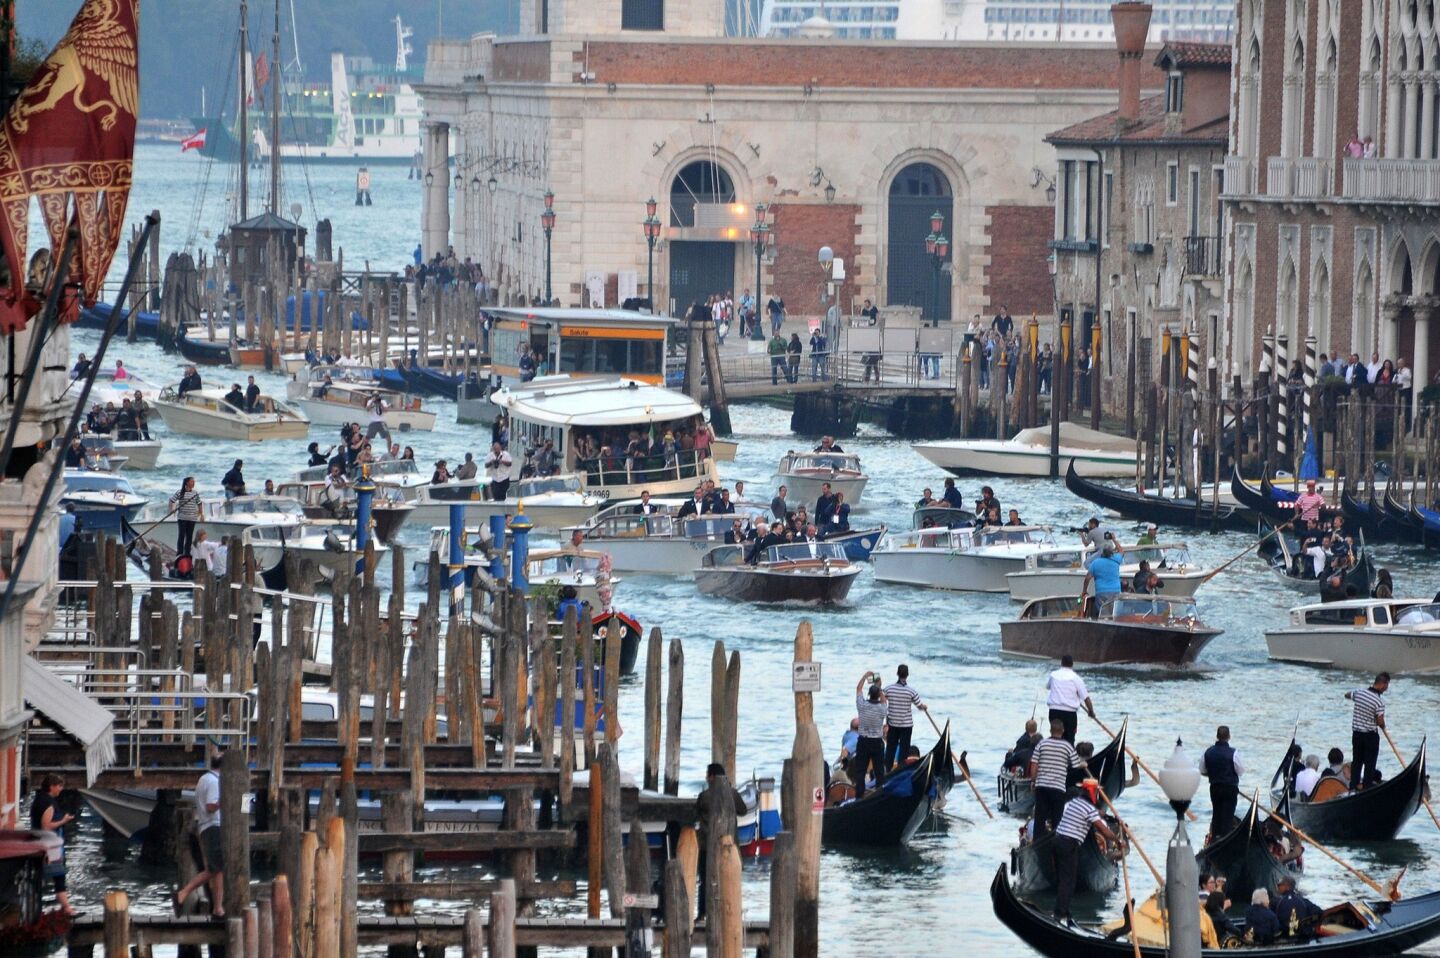 There was quite a traffic jam Saturday on Venice's Grand Canal as George Clooney and guests headed to his wedding to Amal Alamuddin.